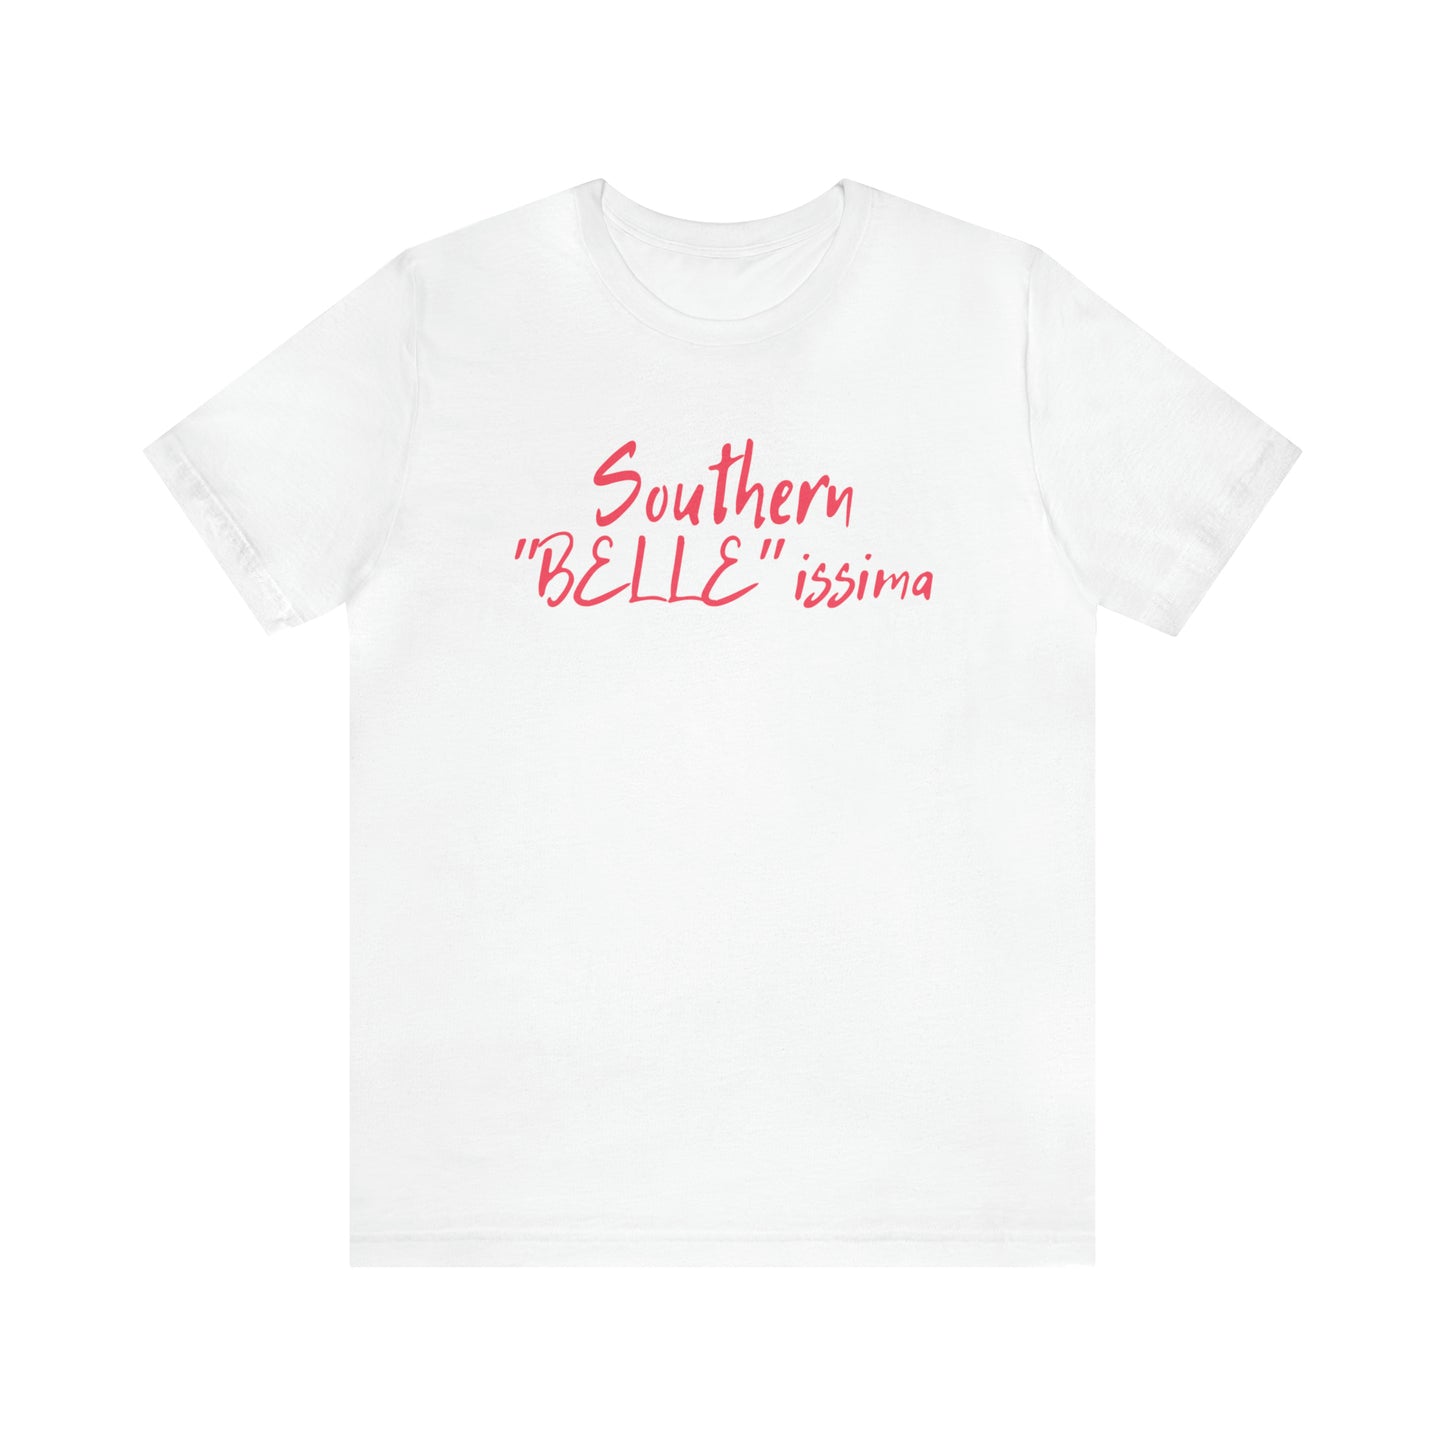 Southern "Belle"issima T-Shirt - Perfectly Pink